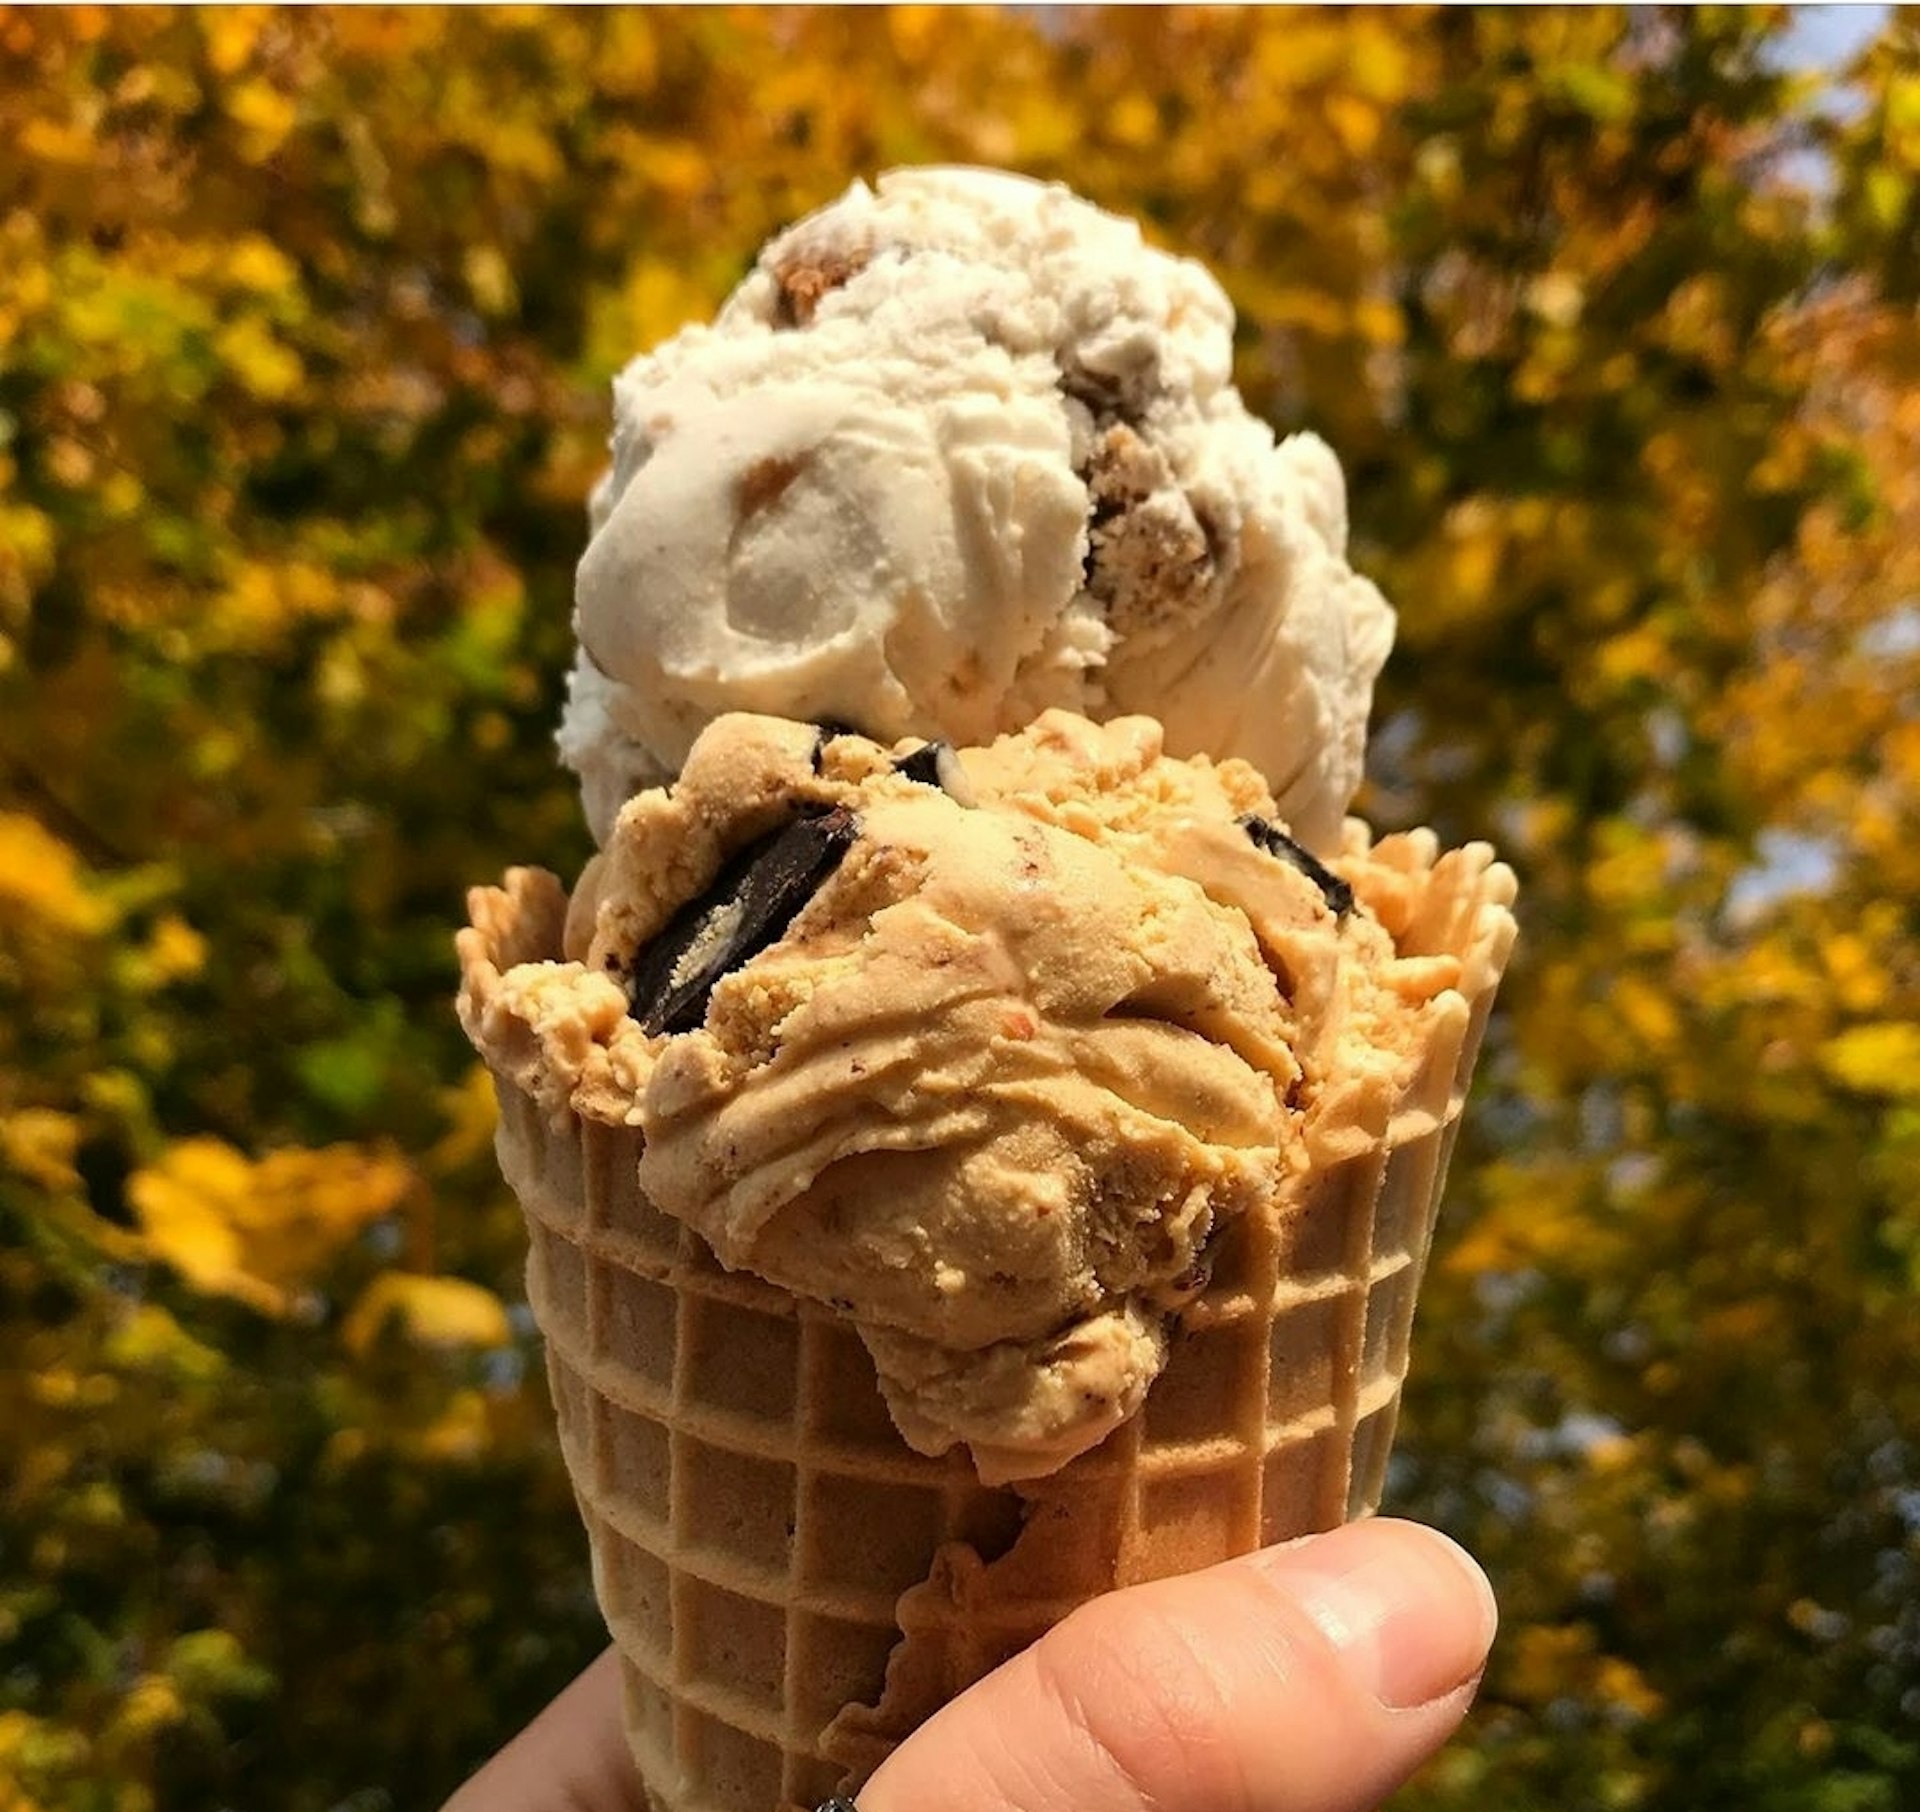 A waffle cone filled with two scoops of ice cream is held up against a backdrop of autumn leaves.